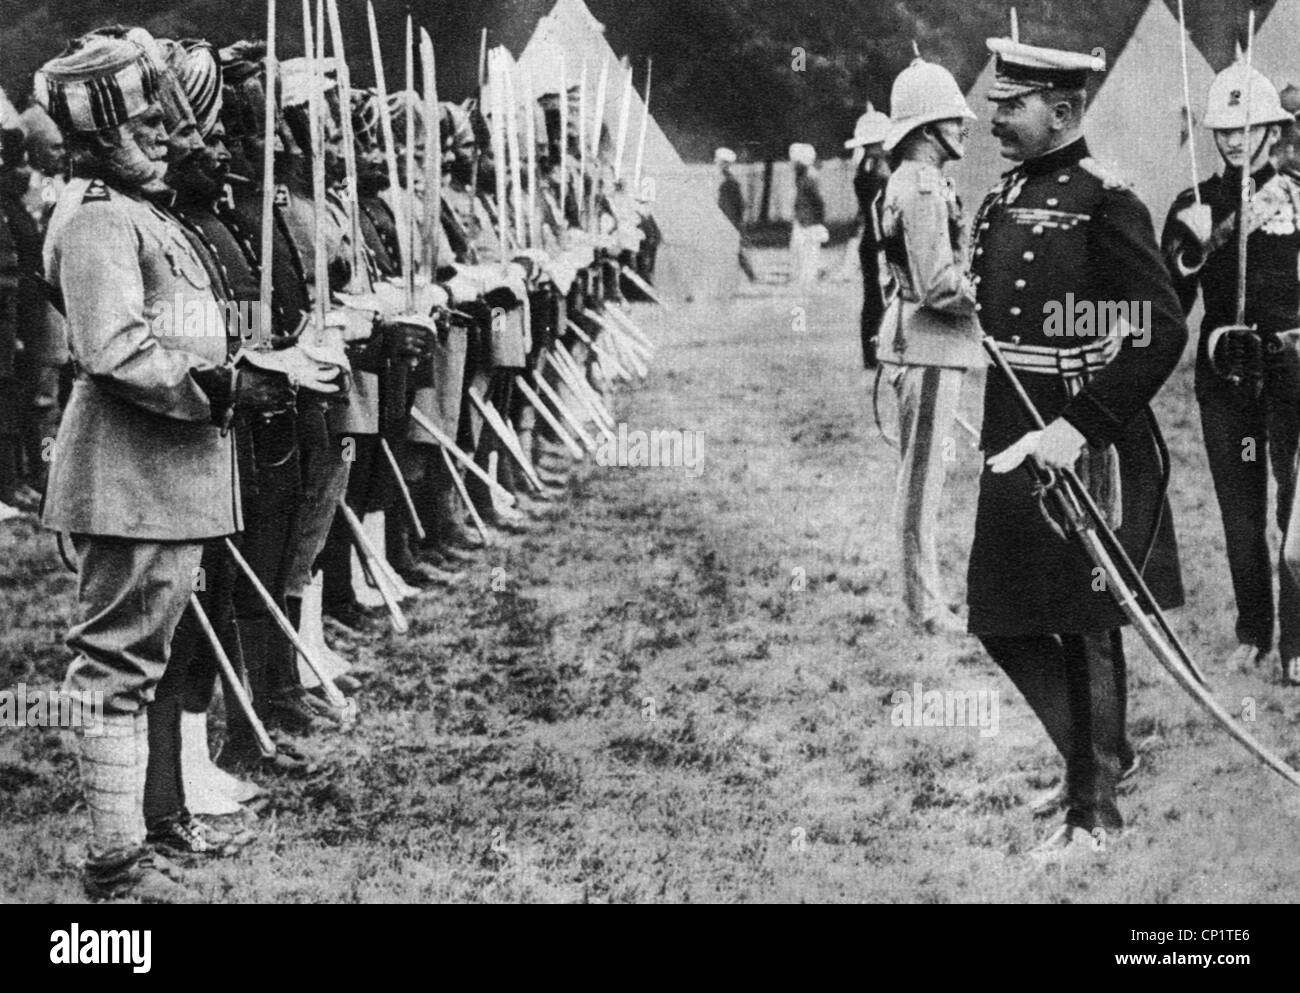 Kitchener, Horatio, 24.6.1850 - 5.6.1916, British general, Minister of War 5.8.1914 - 5.6.1916, inspecting Indian troops, 1914, Stock Photo